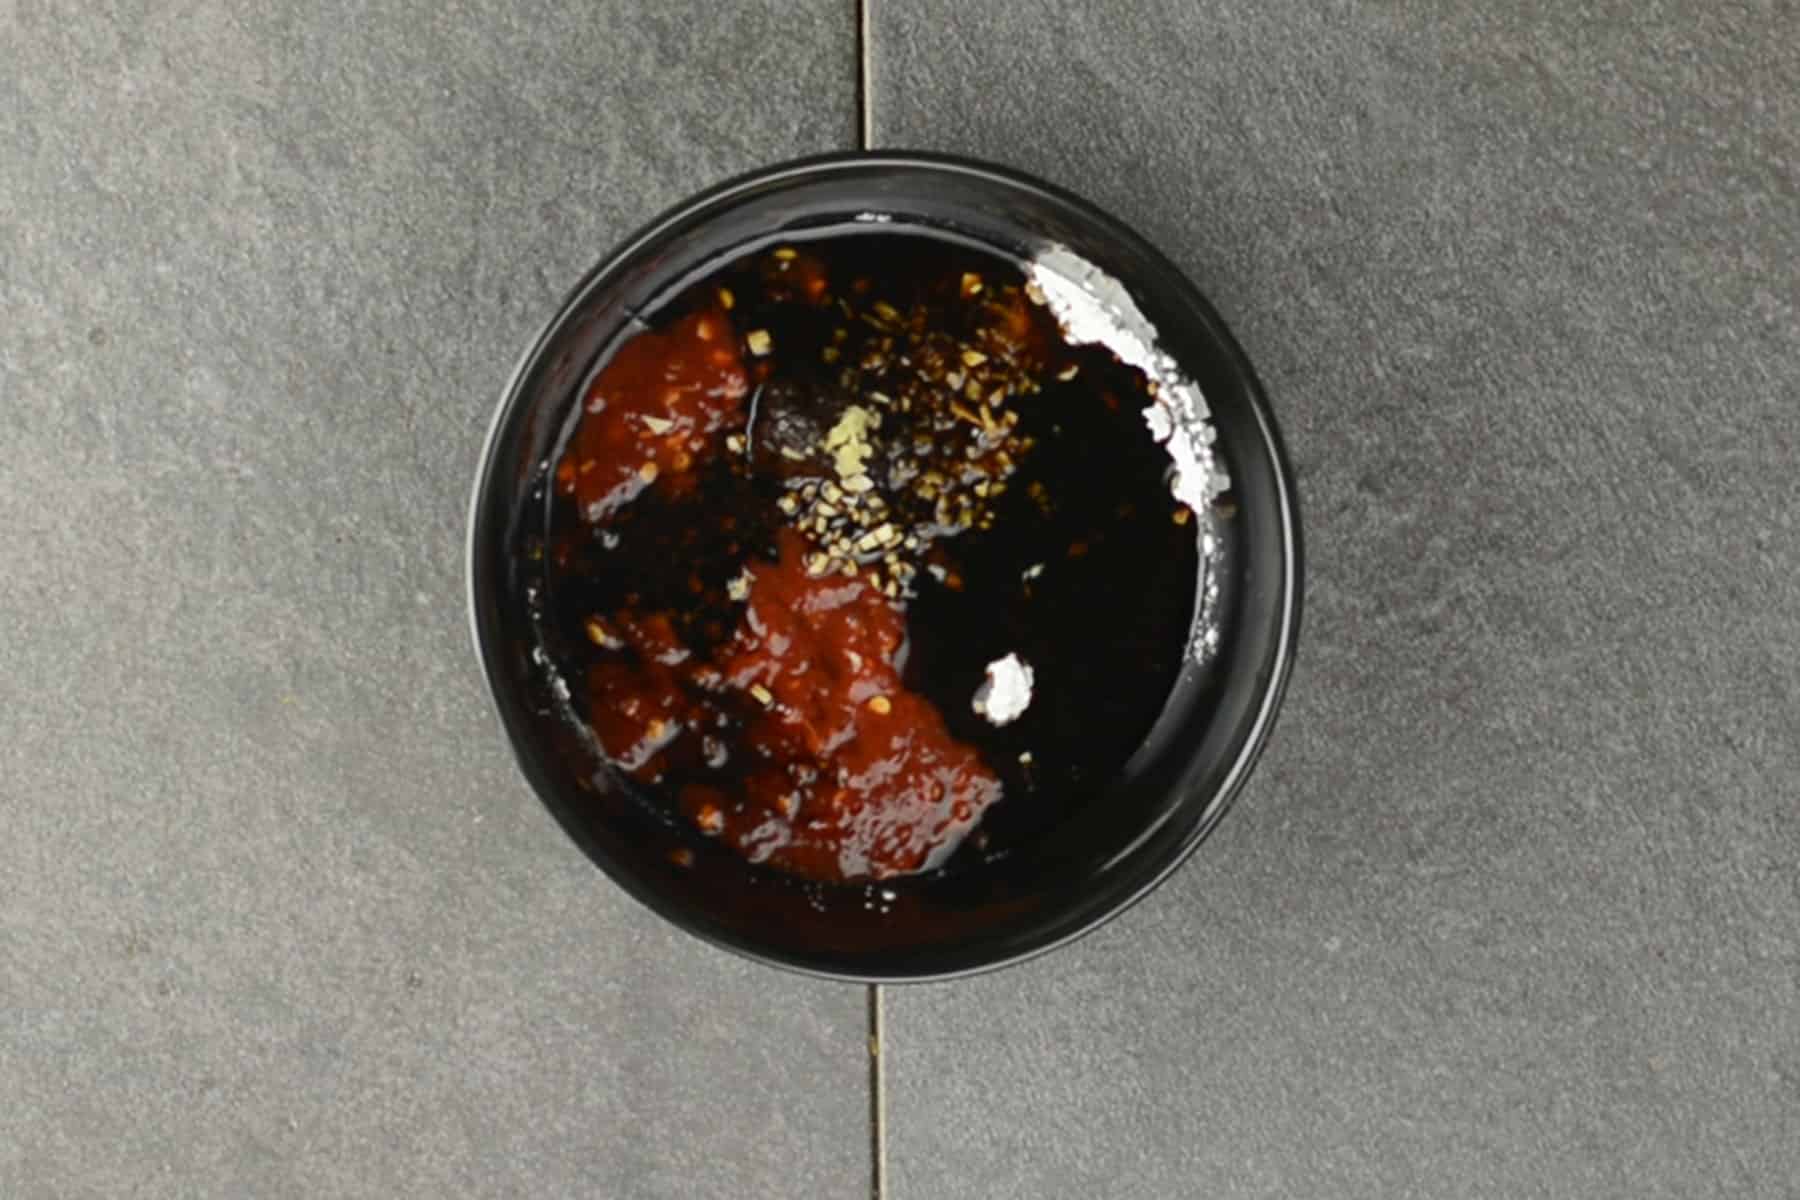 mix the sauce in a small mixing bowl